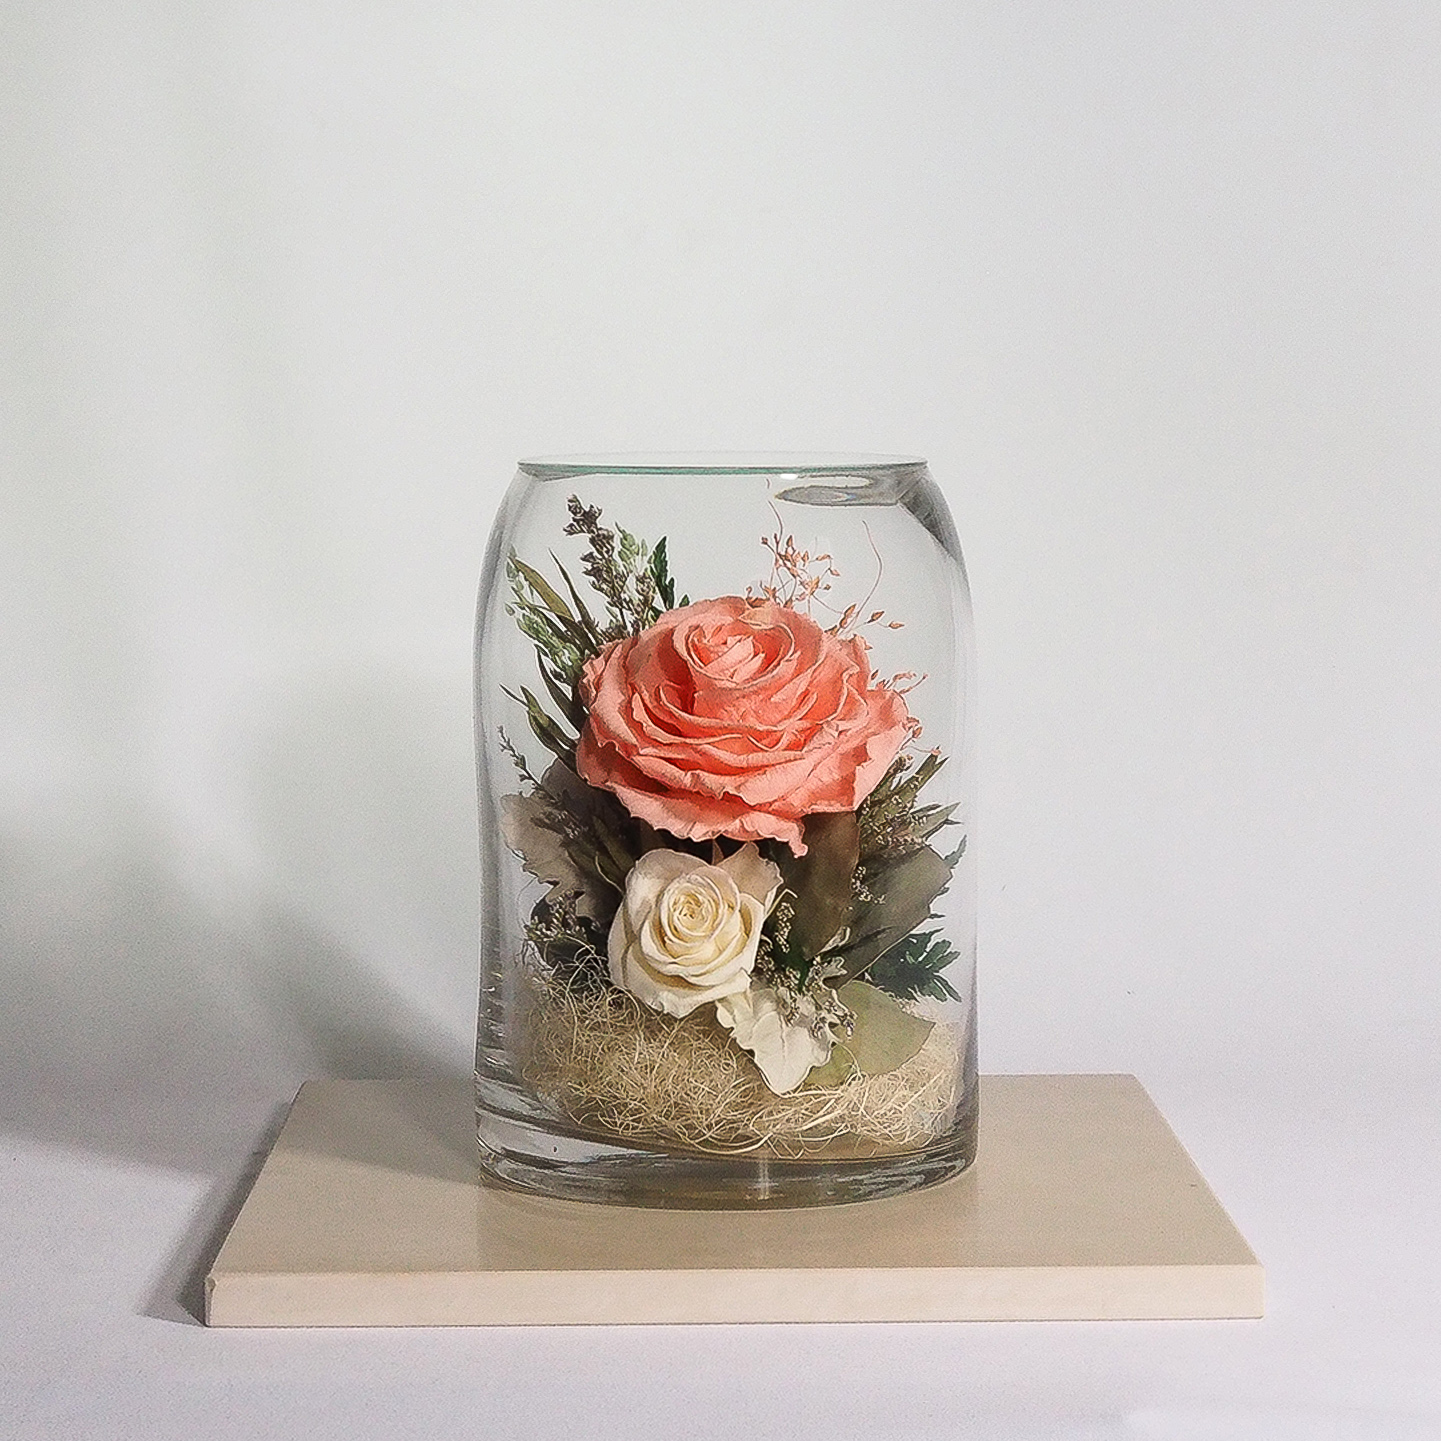 Preserved Flower Imported From Japan (Peach-Ivory White-Pink Champagne)(67143). For Valentines, Gift, Home Decoration, Anniversary and present for your love ones. 100% natural flower.